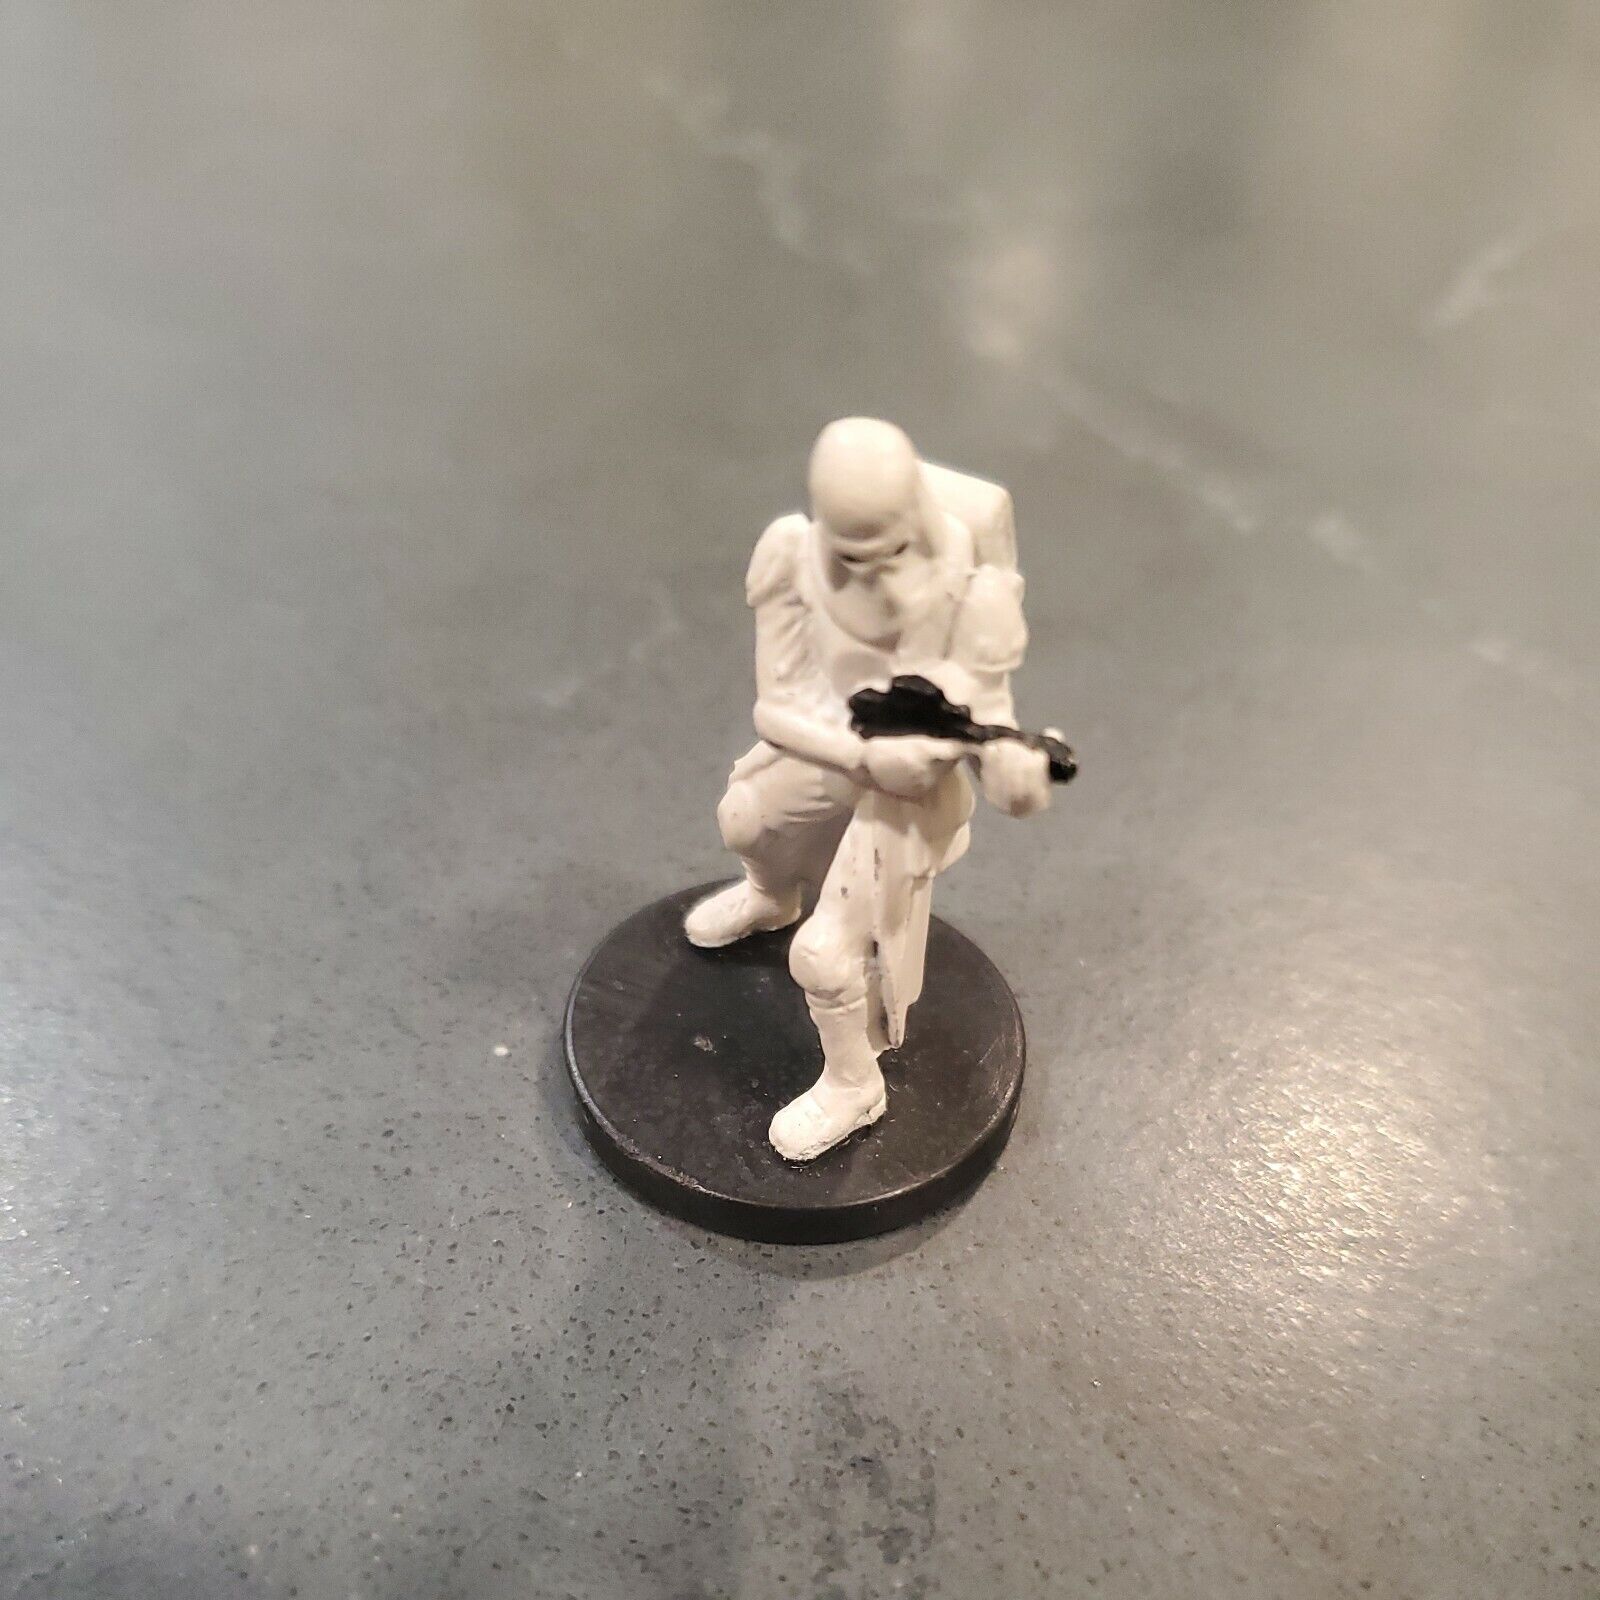 Snowtrooper 21 No Card Wizards Of The Coast Star Wars Miniature